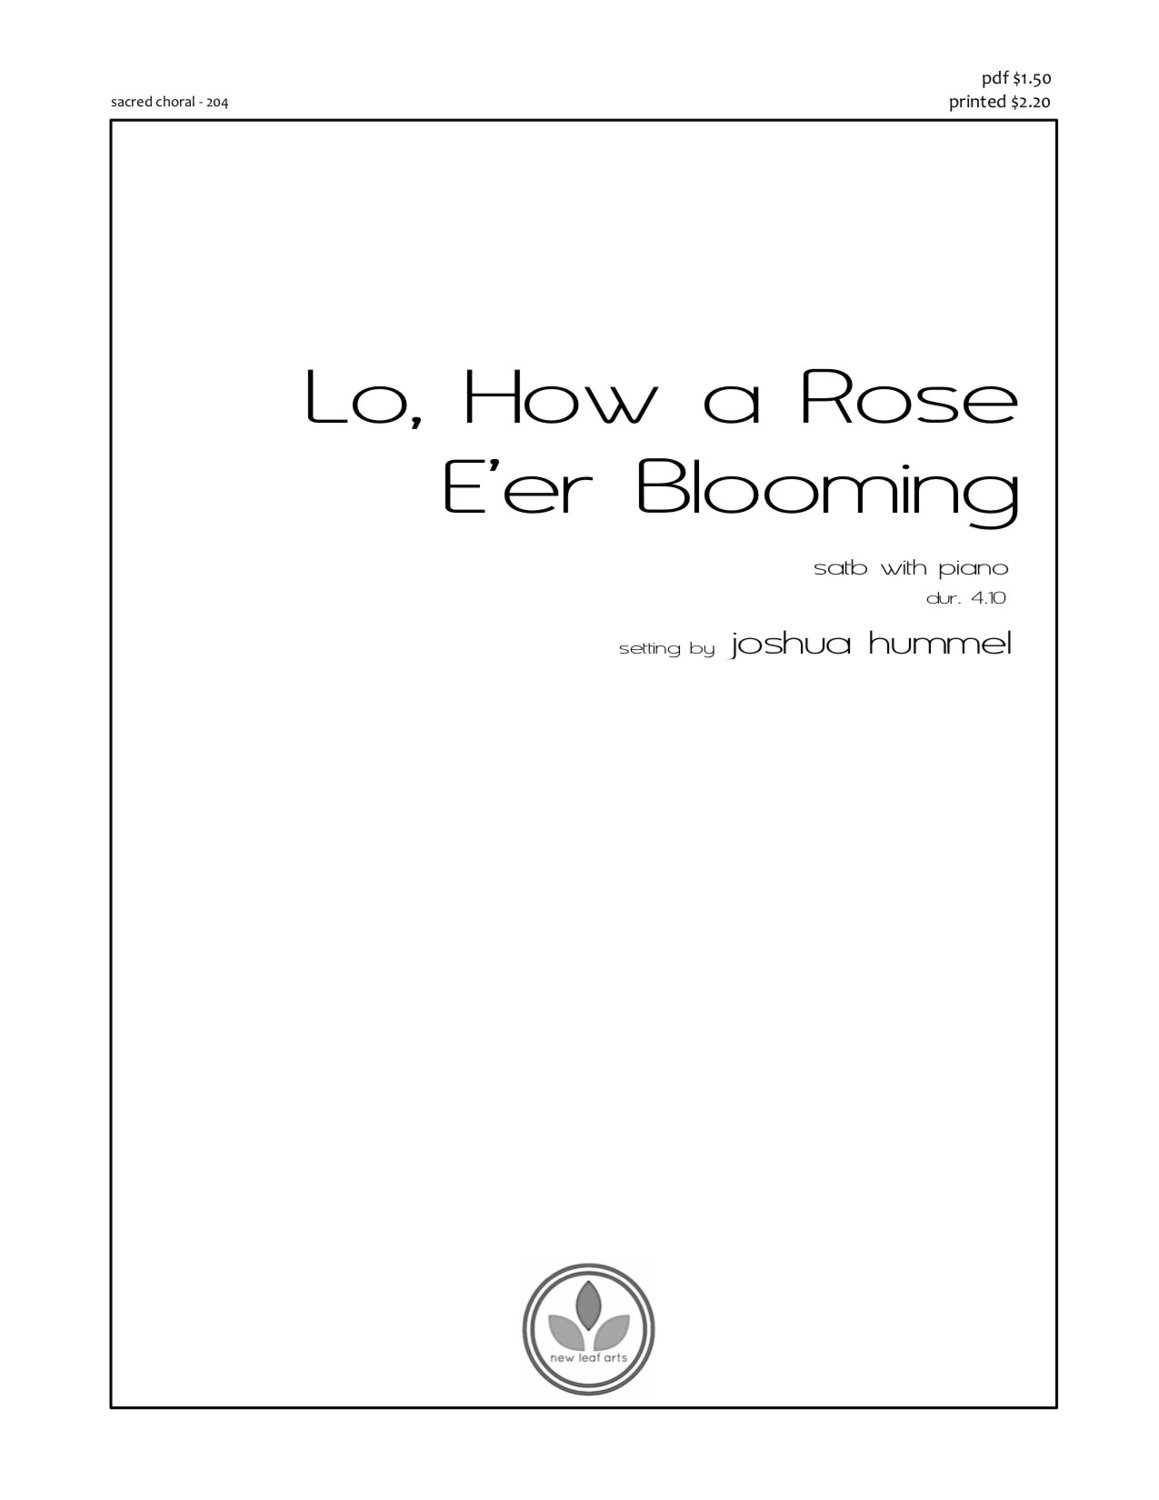 LO, HOW A ROSE E'ER BLOOMING - SATB with piano